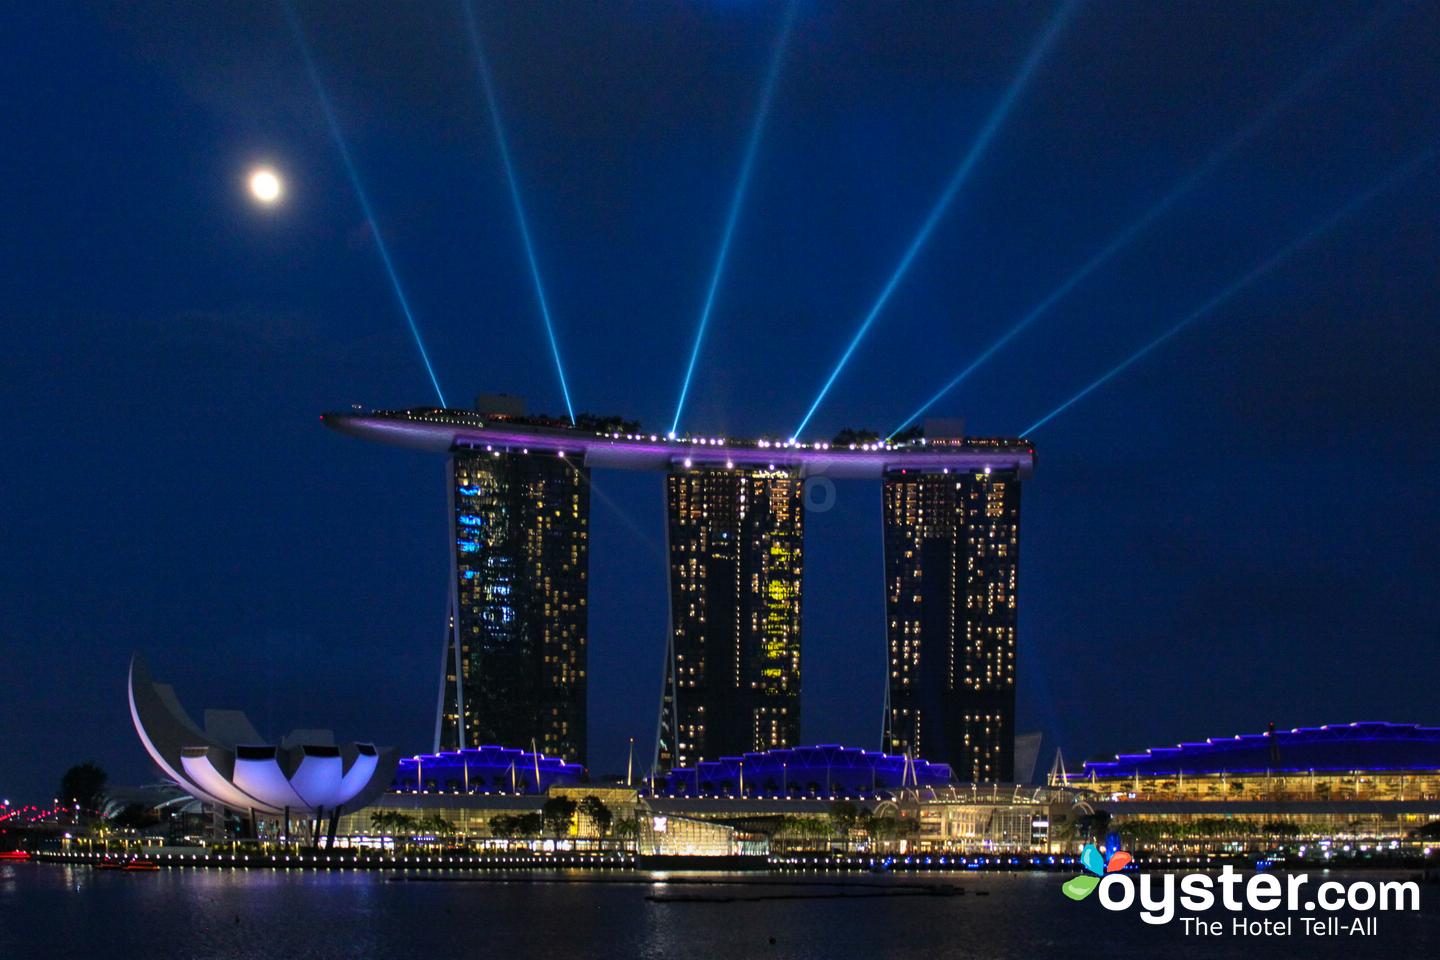 About Marina Bay Sands